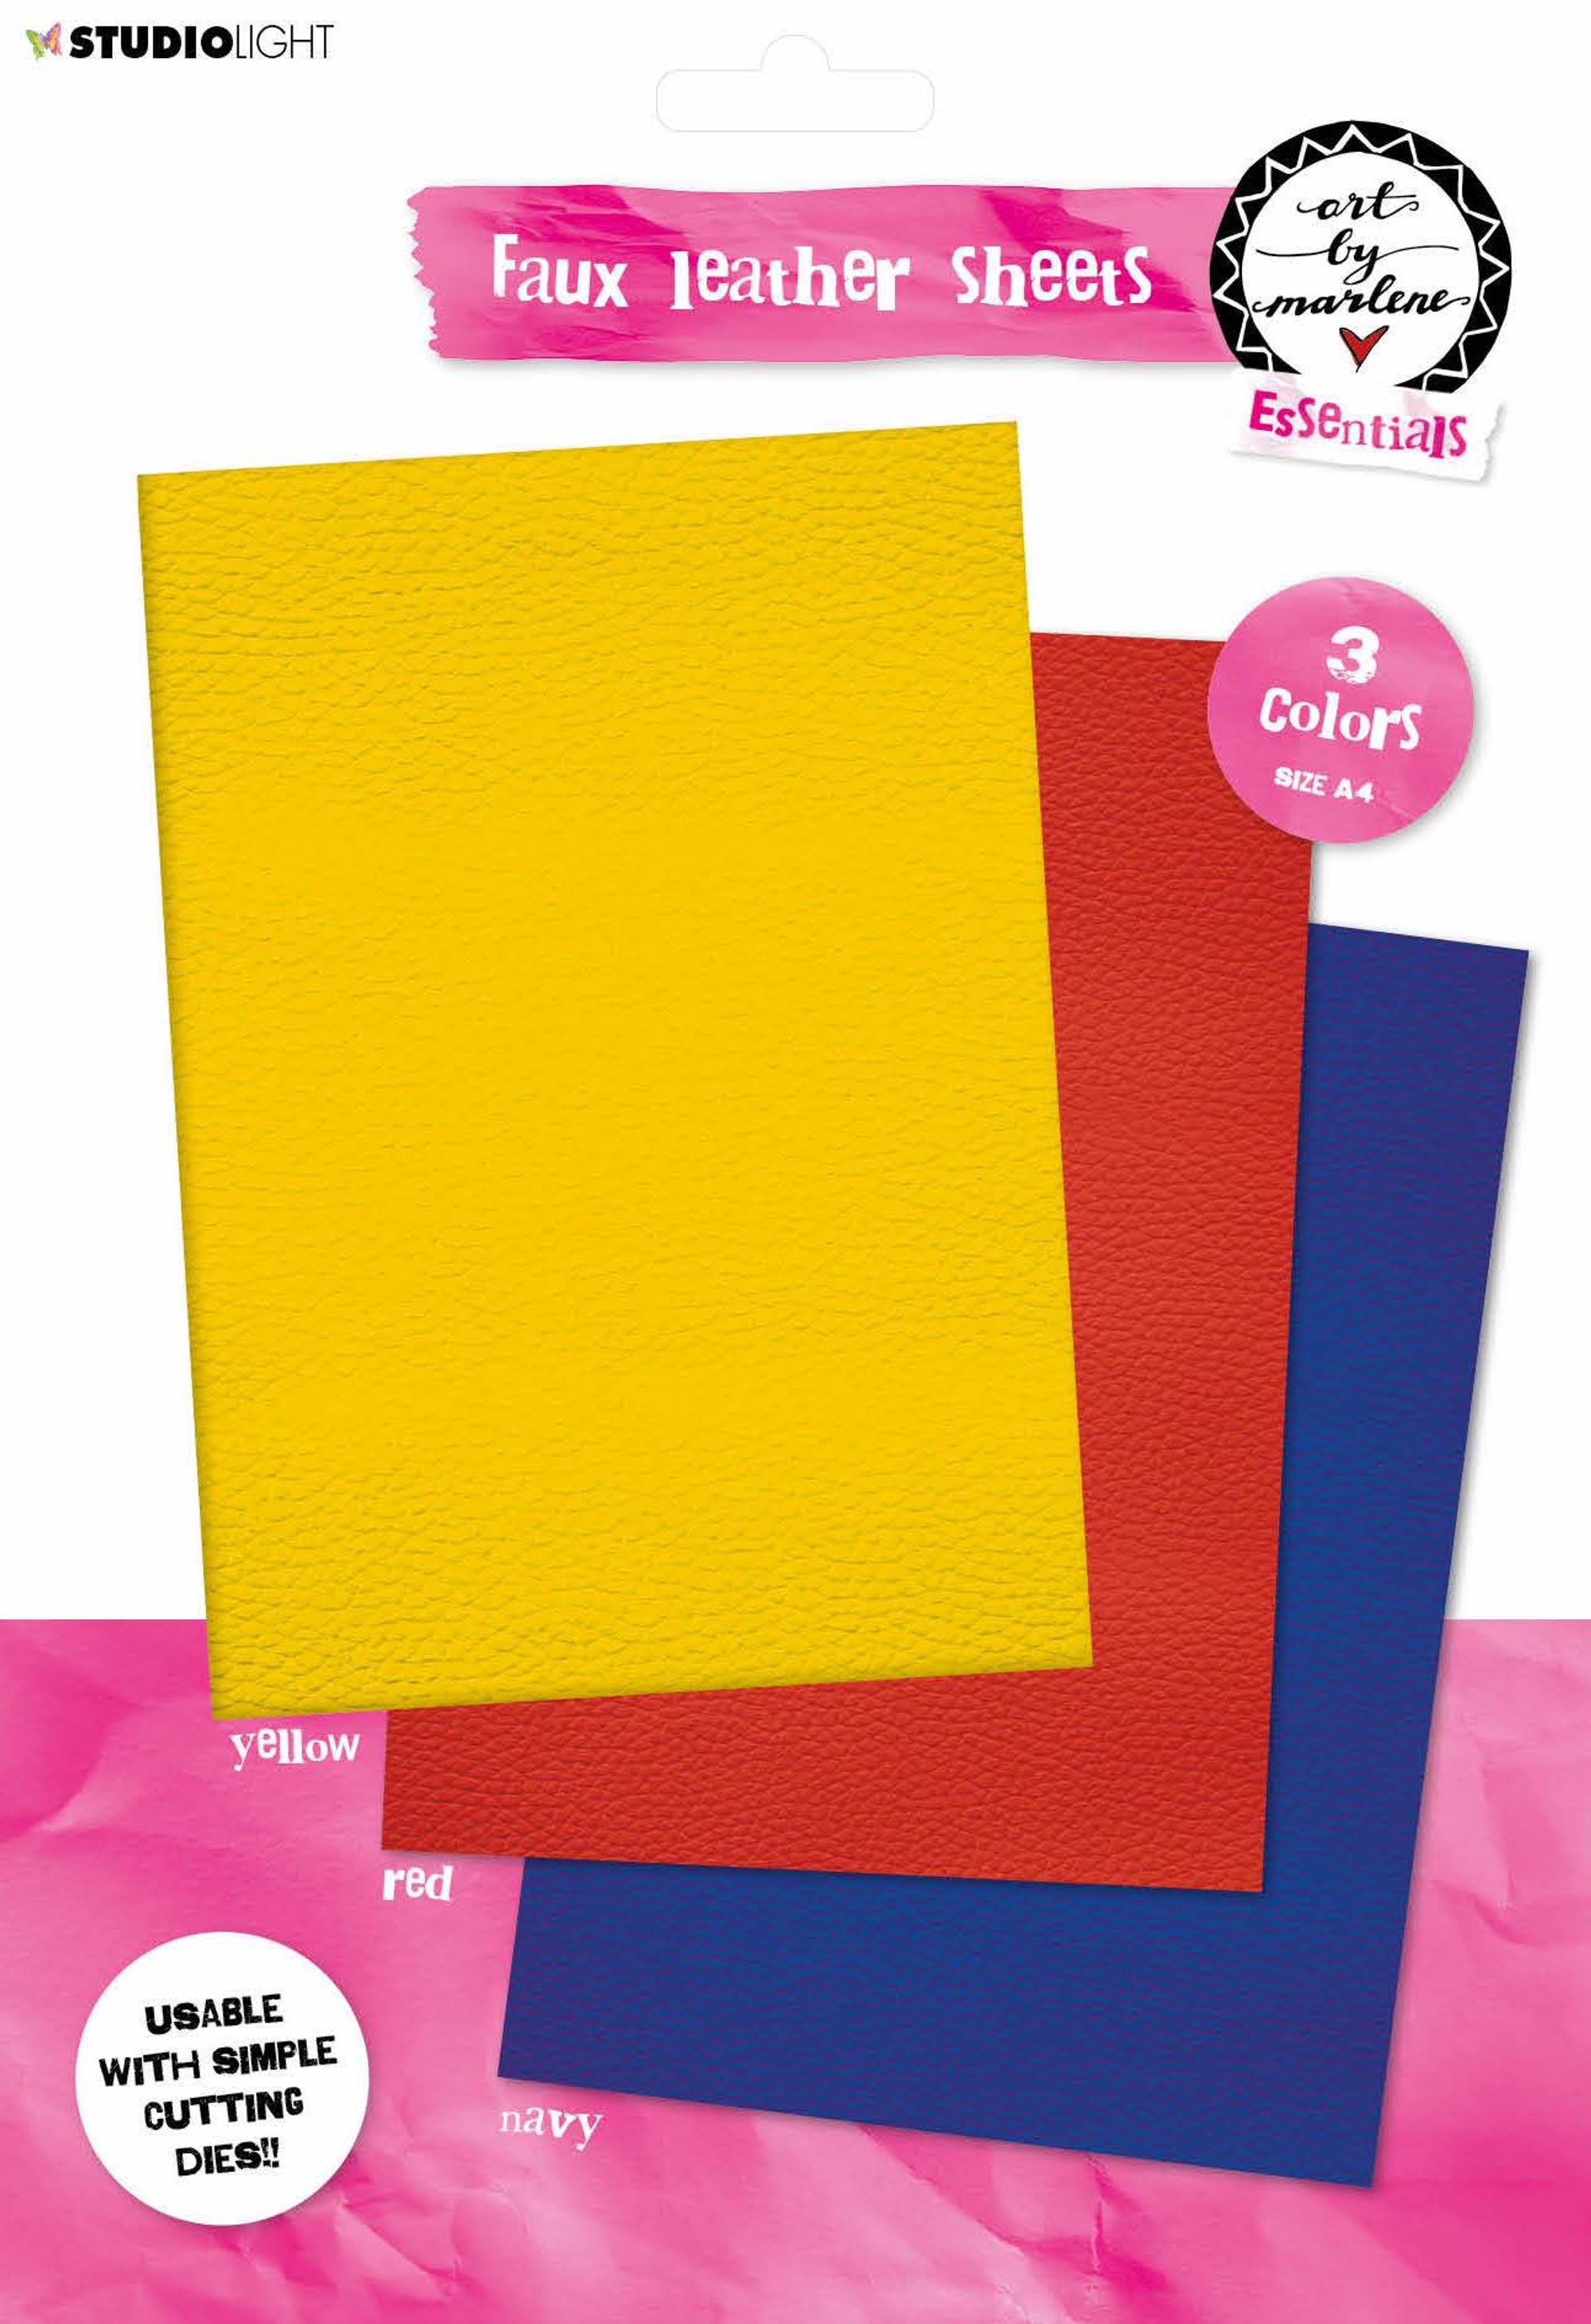 Studio Light Art by Marlene Faux Leather Sheets A4 3/Pkg-Yellow, Red & Blue